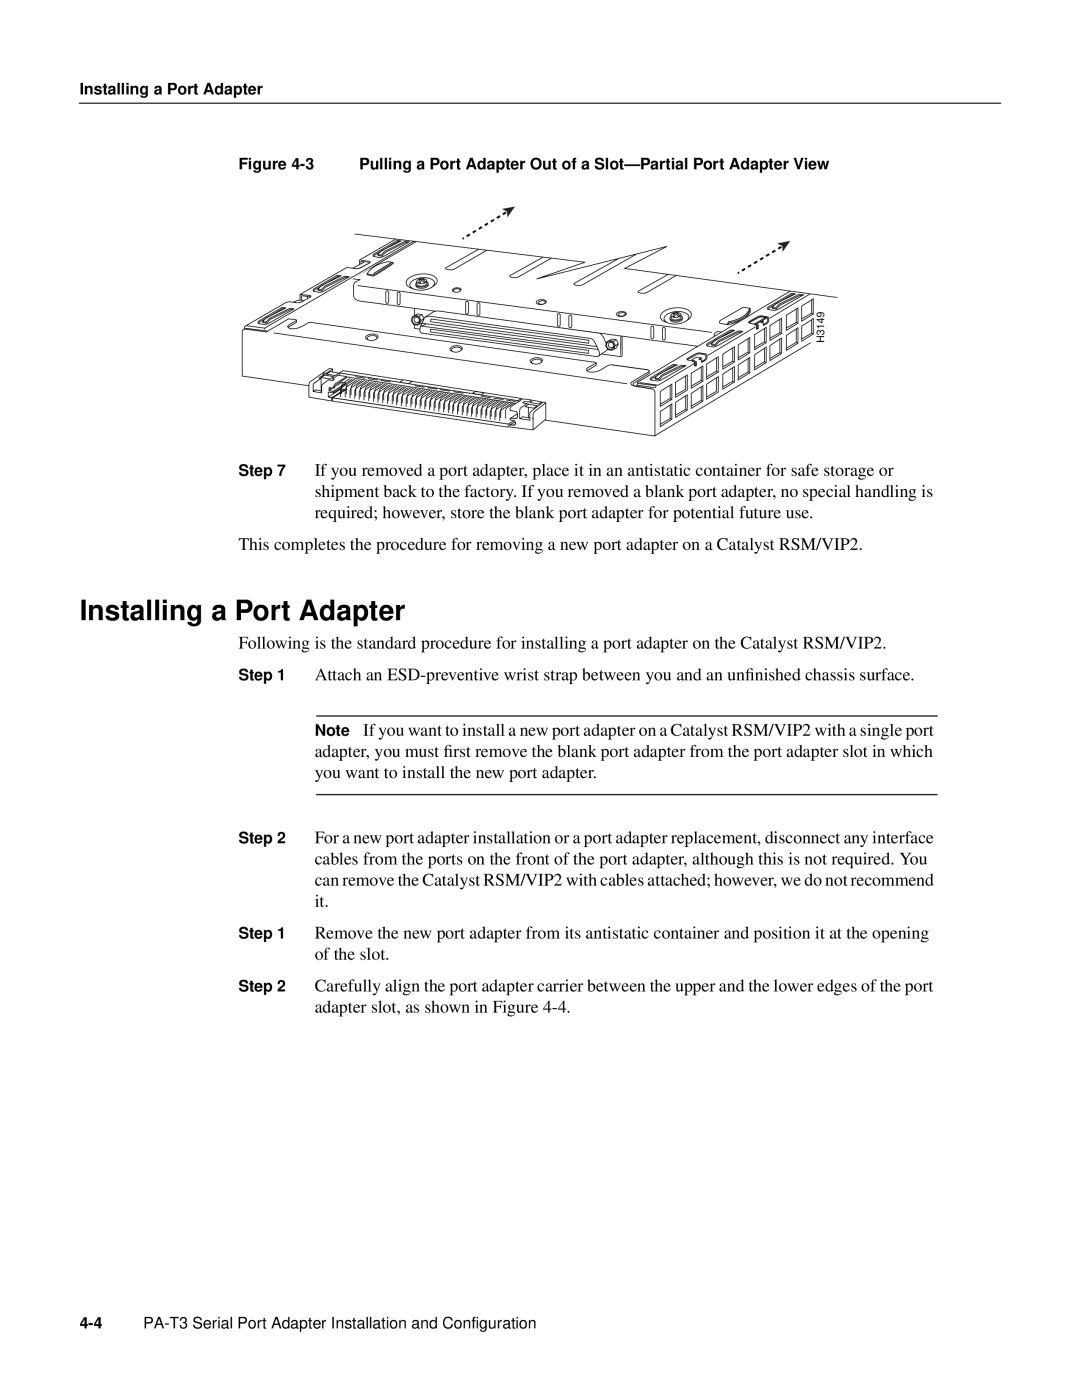 Cisco Systems manual Installing a Port Adapter, PA-T3 Serial Port Adapter Installation and Configuration 